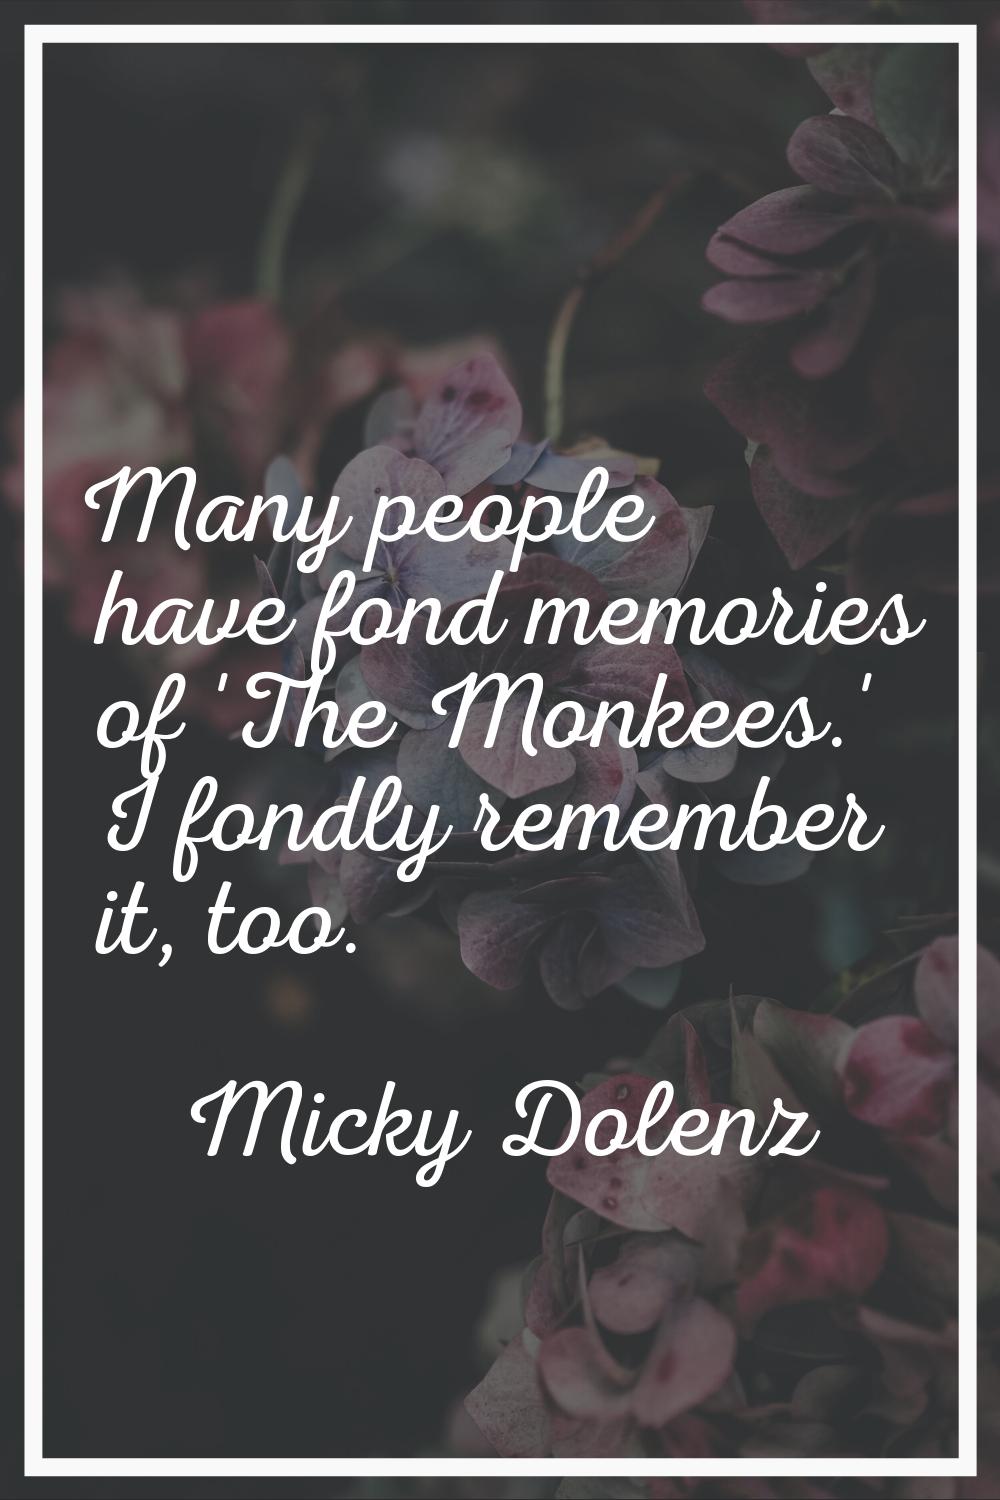 Many people have fond memories of 'The Monkees.' I fondly remember it, too.